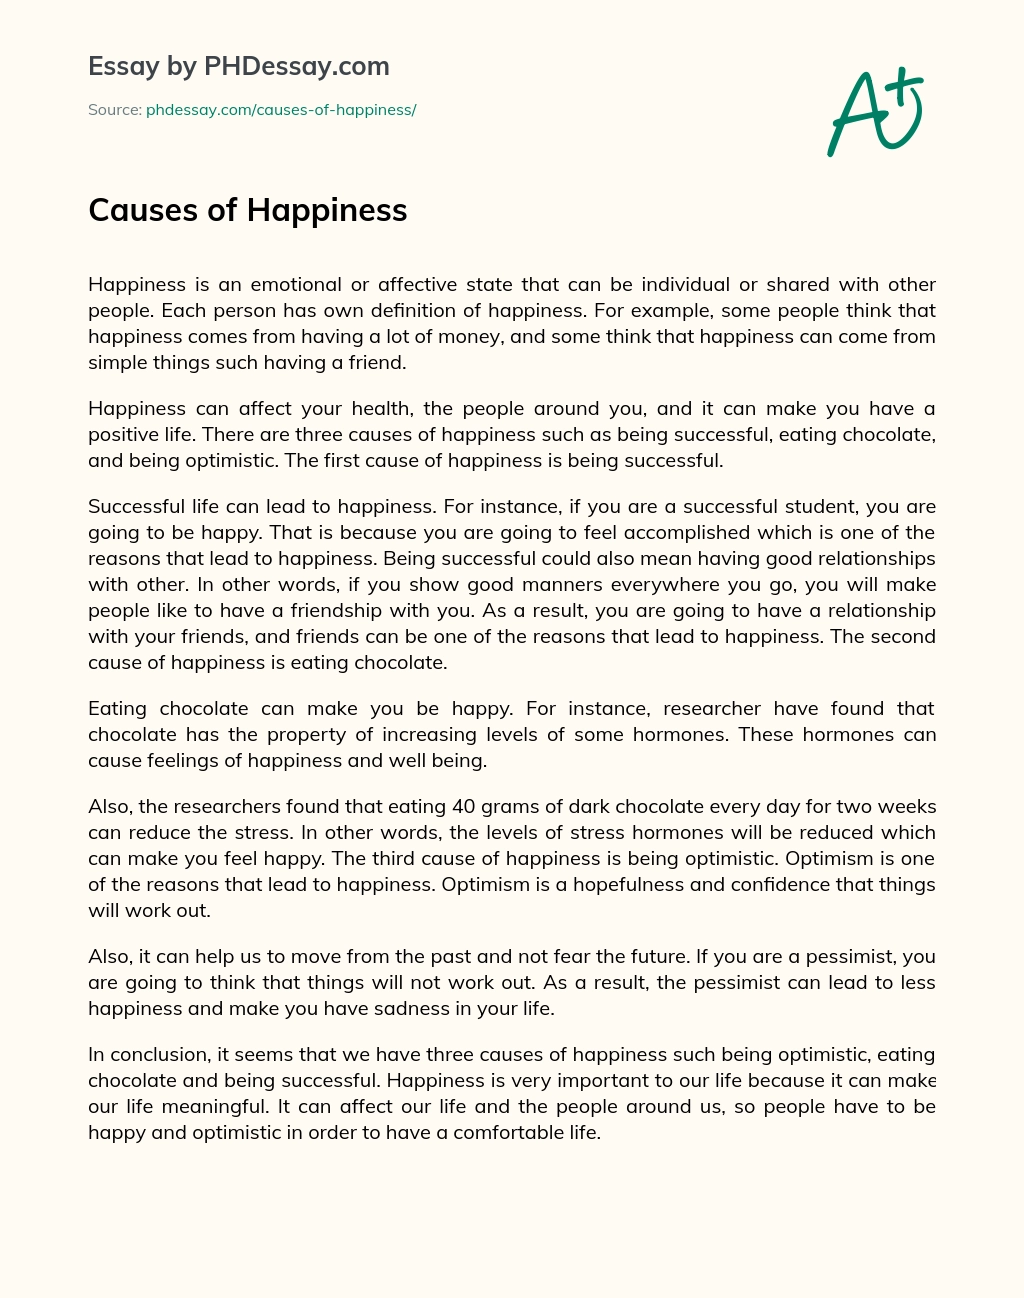 Causes of Happiness essay